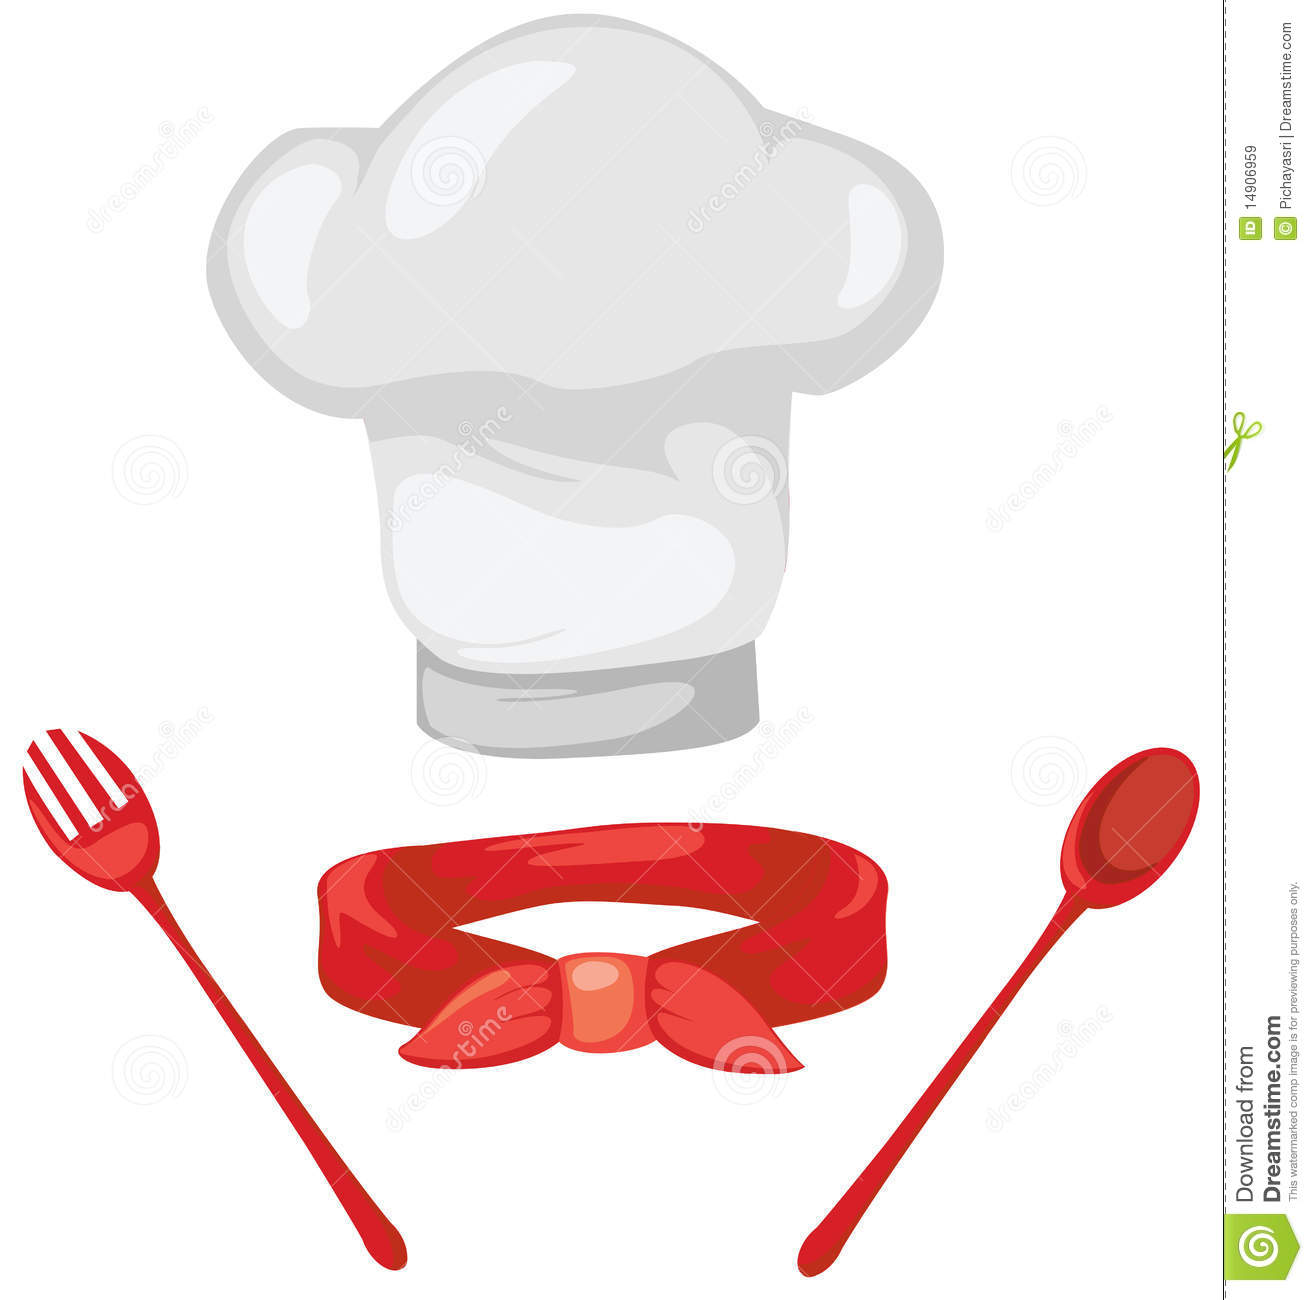 Set Of Chef Hat Red Scarf Spoon And Fork Royalty Free Stock Images    